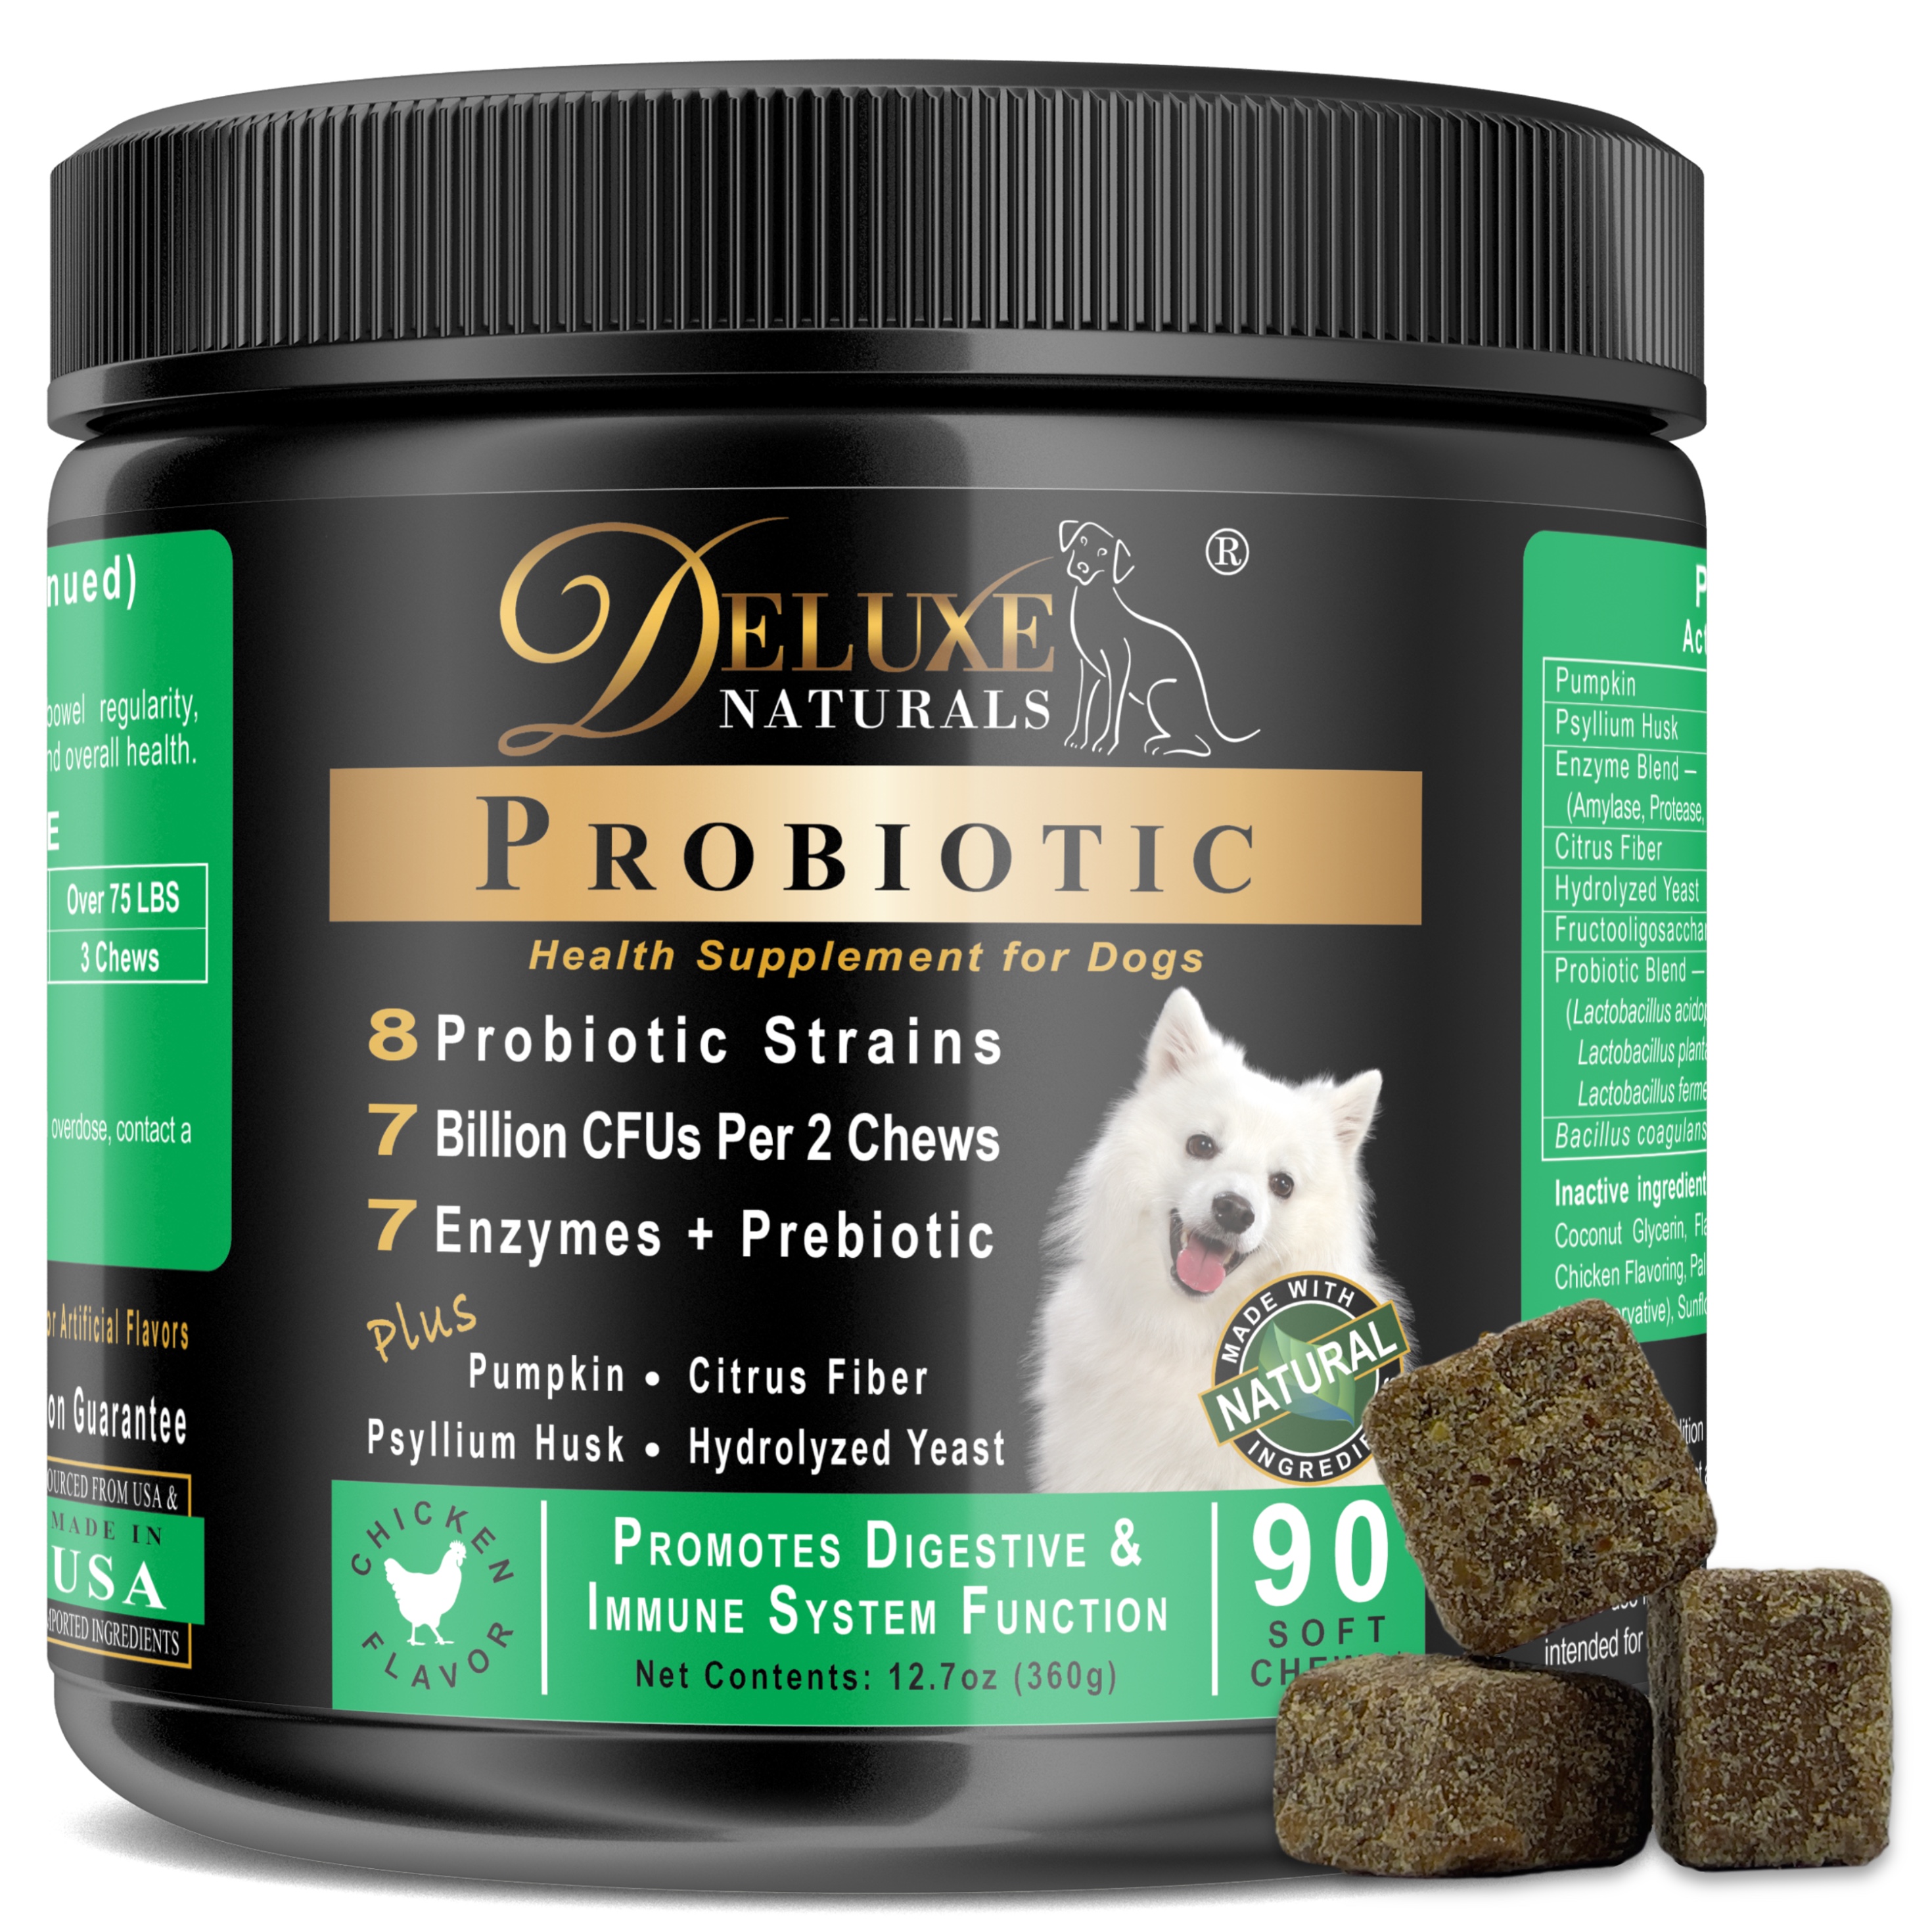 Deluxe Naturals Probiotics for Dogs | All-Natural Dog Probiotic Soft Chews with Enzymes, Prebiotics, Pumpkin | Promotes Digestive Health, Improves Allergy & Immunity - 90 Count (Pack of 1) - image 1 of 10